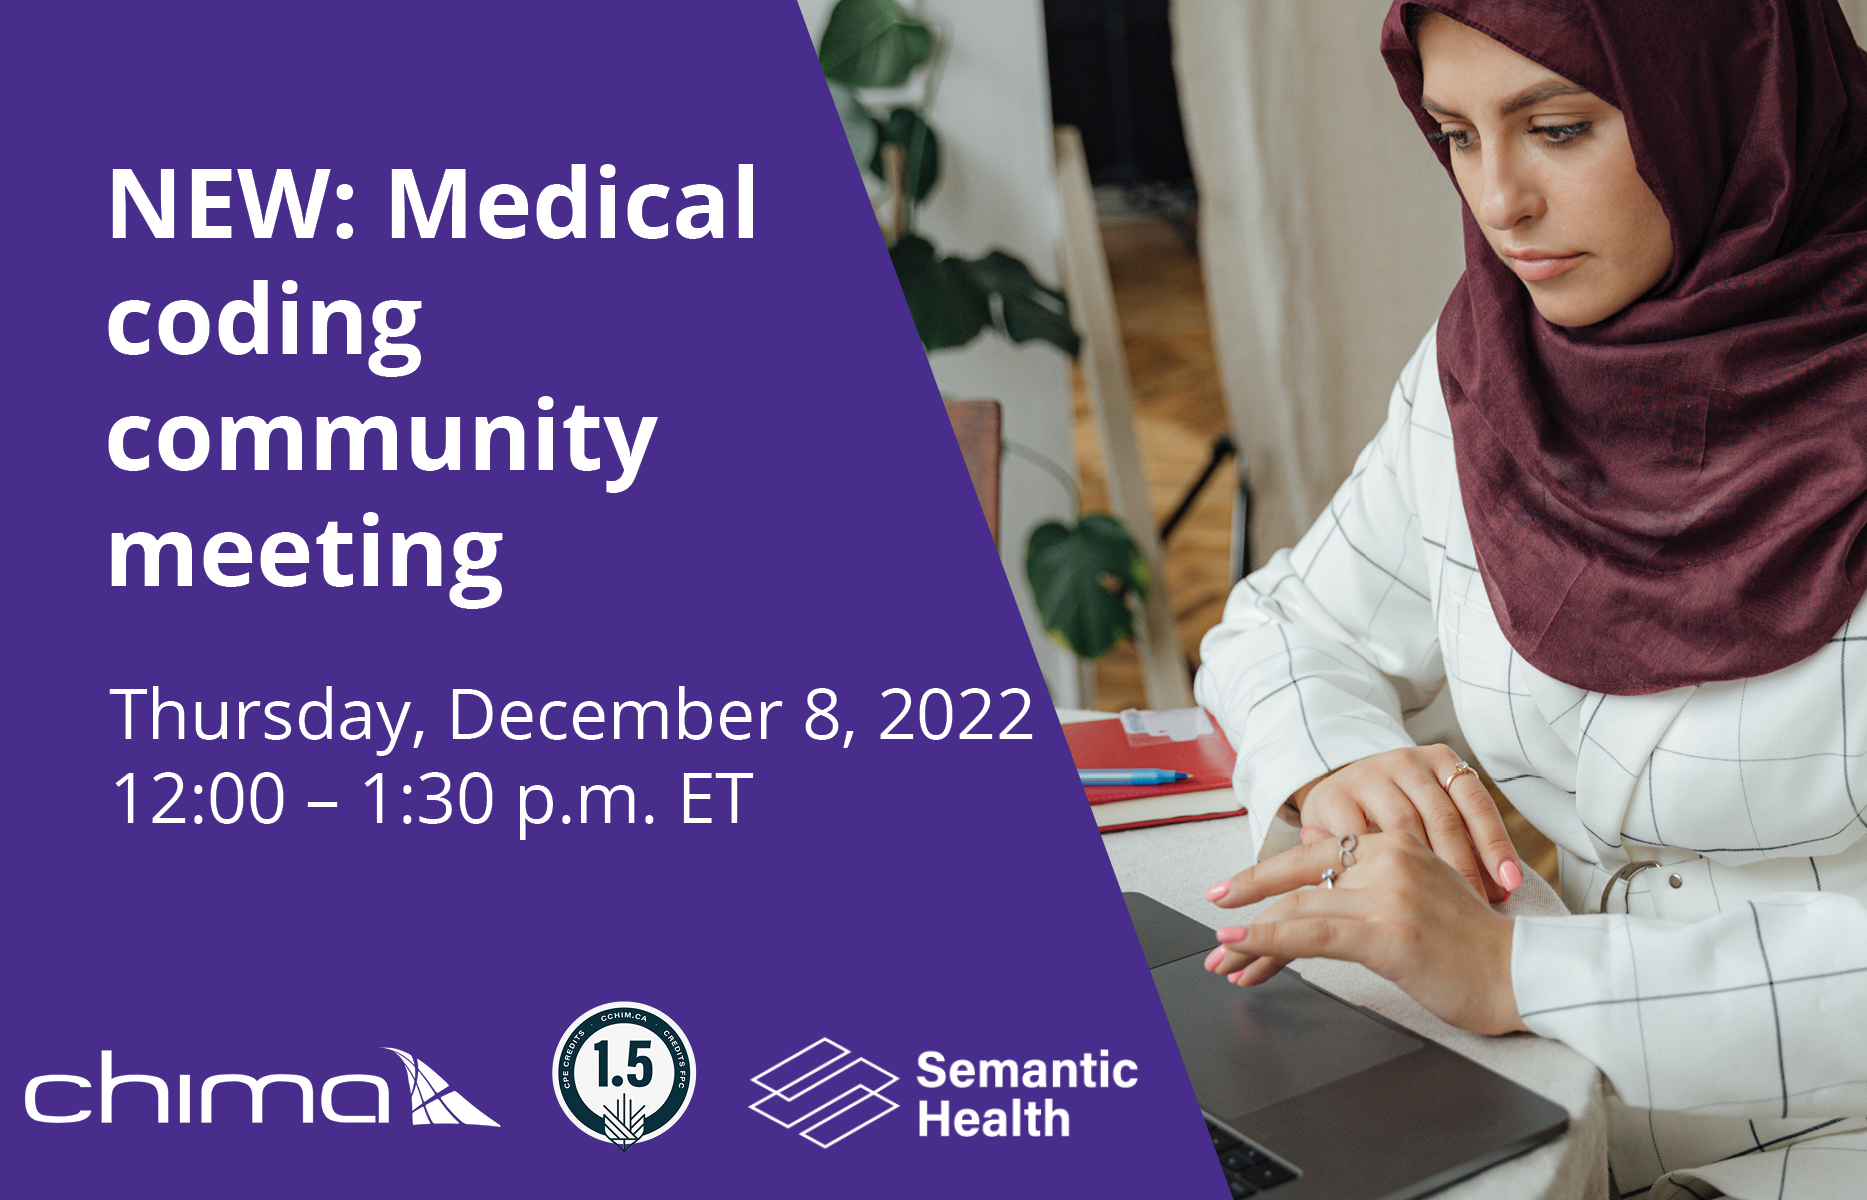 A banner for the CHIMA Information Governance Community meeting coming up on December 8 from 12 - 1:30 pm Eastern time. There's a purple background on the left half and an image of a person smiling, wearing a hijab. They're working on a laptop wearing a white long sleeved shirt with a thin black window pane pattern.